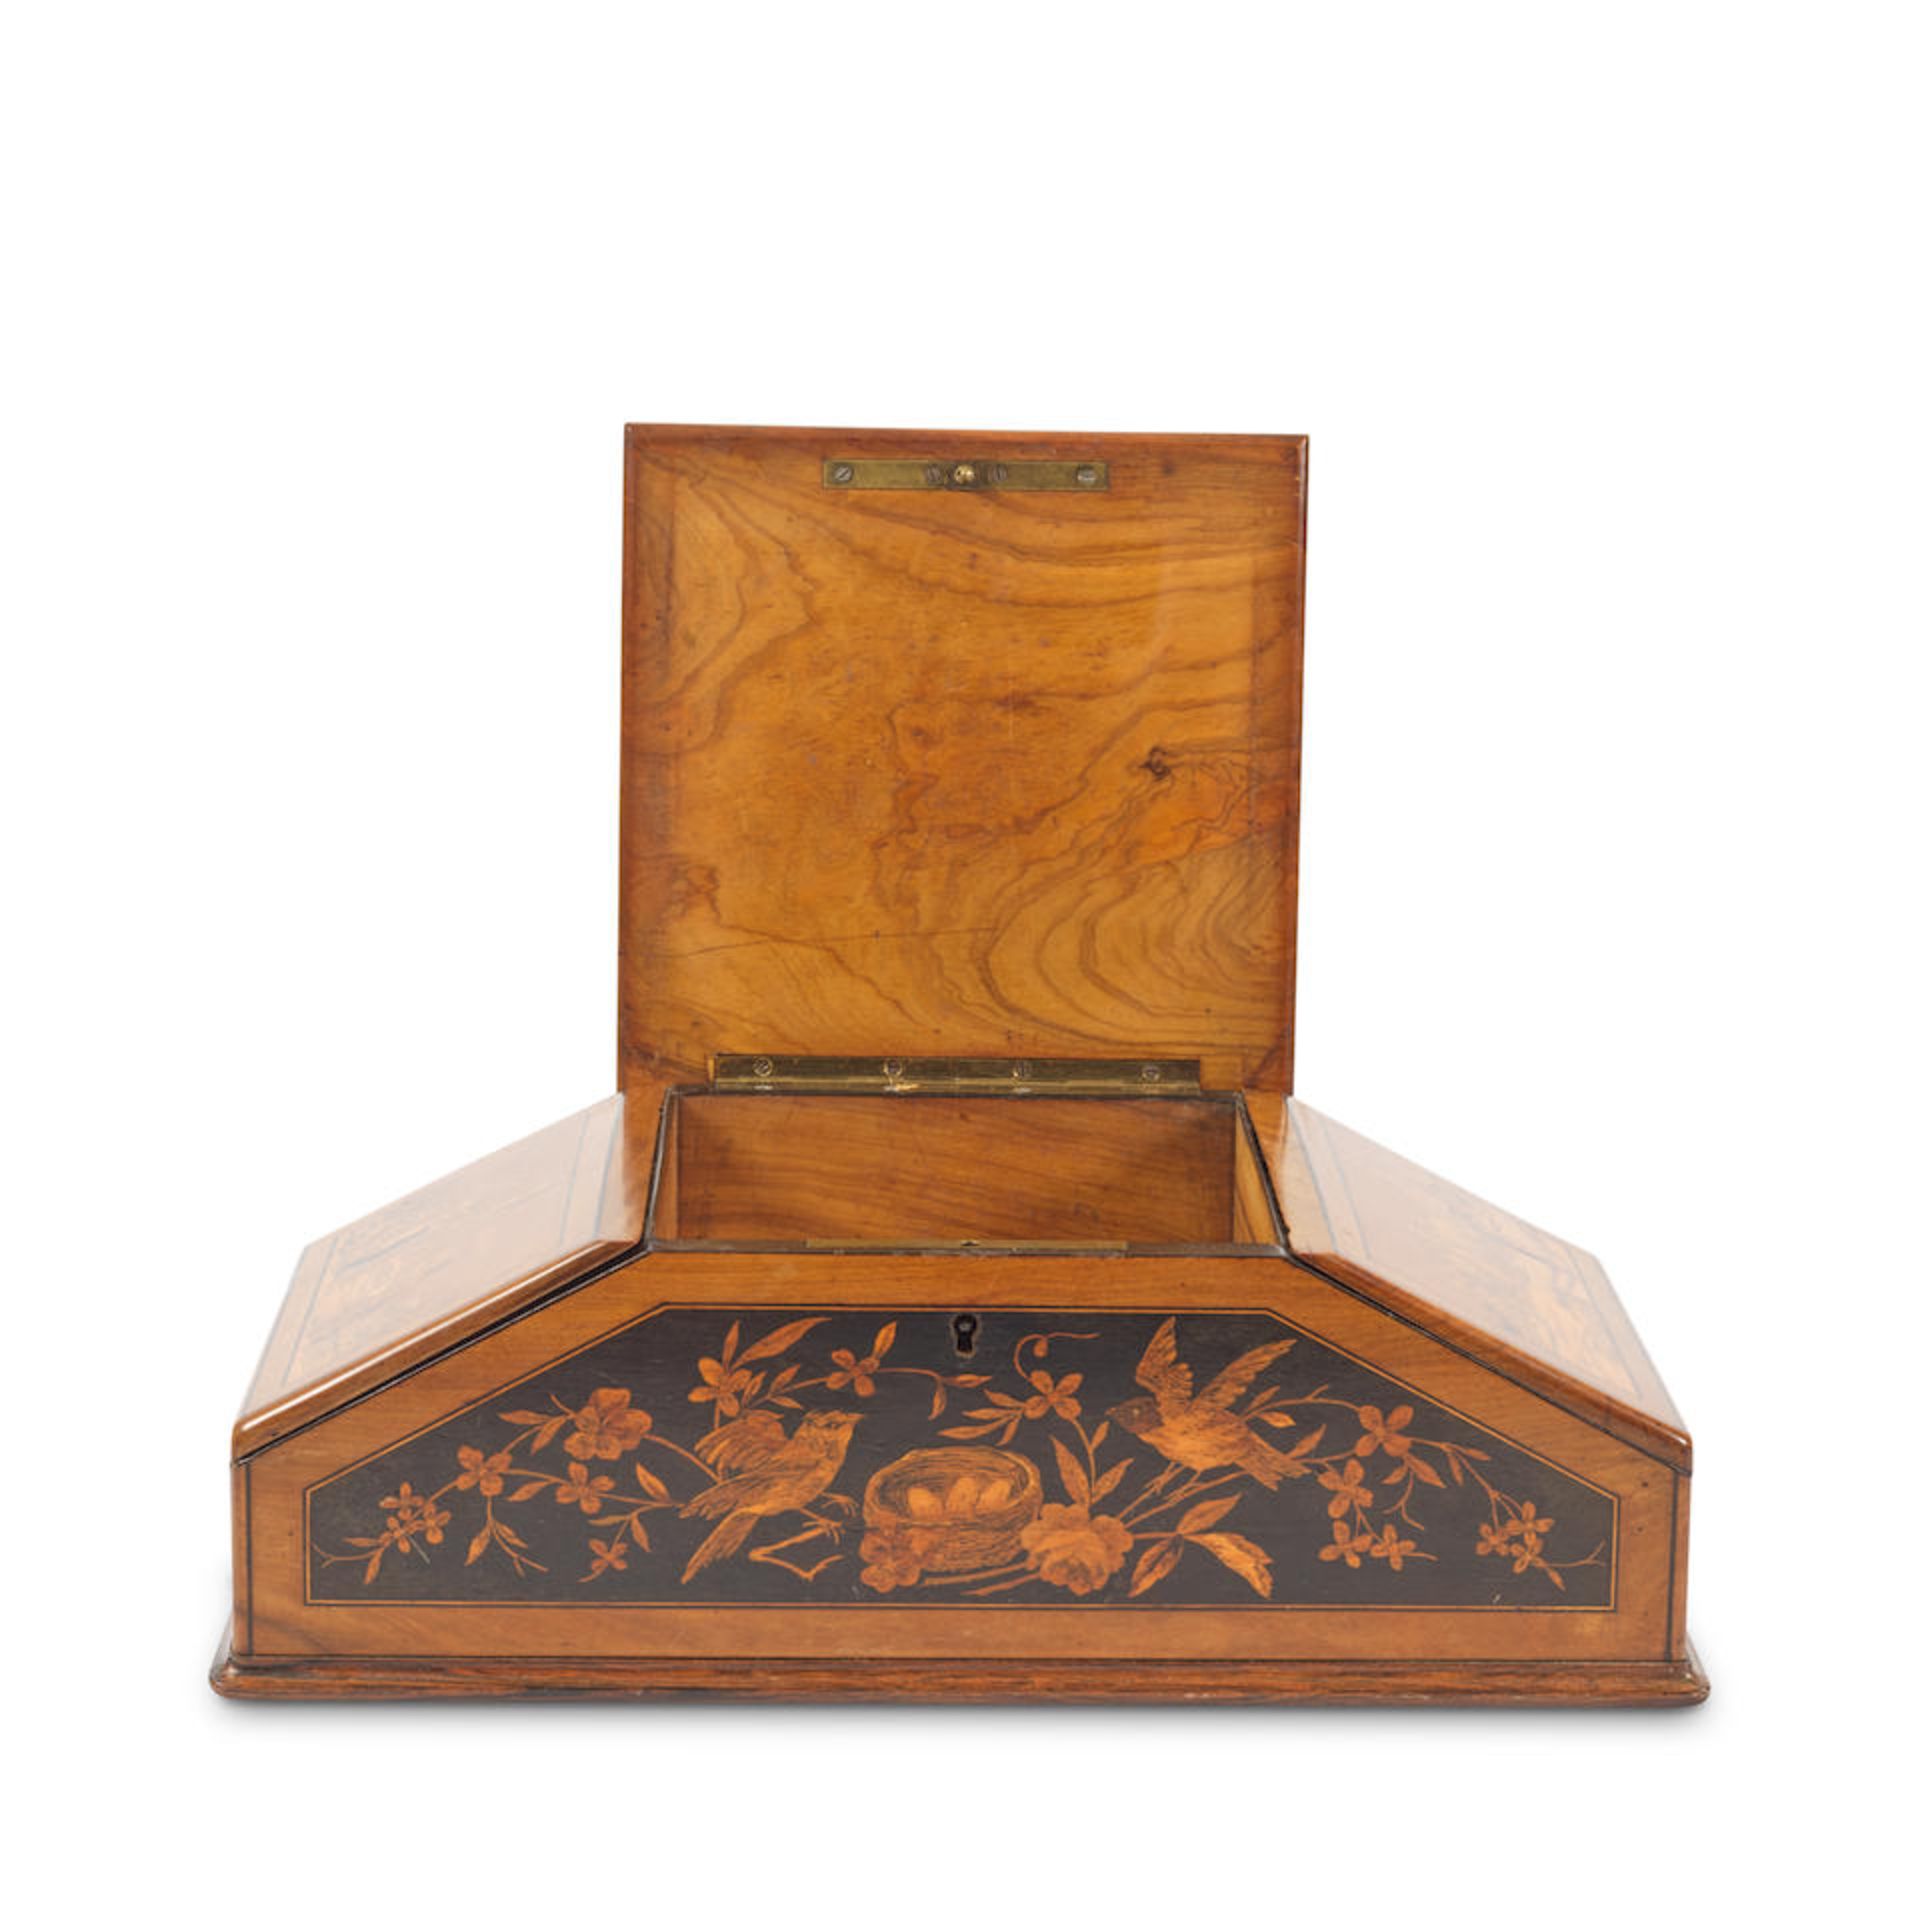 A late 19th century Italian 'Sorrento ware' olive wood and marquetry inlaid stationary box - Bild 2 aus 2